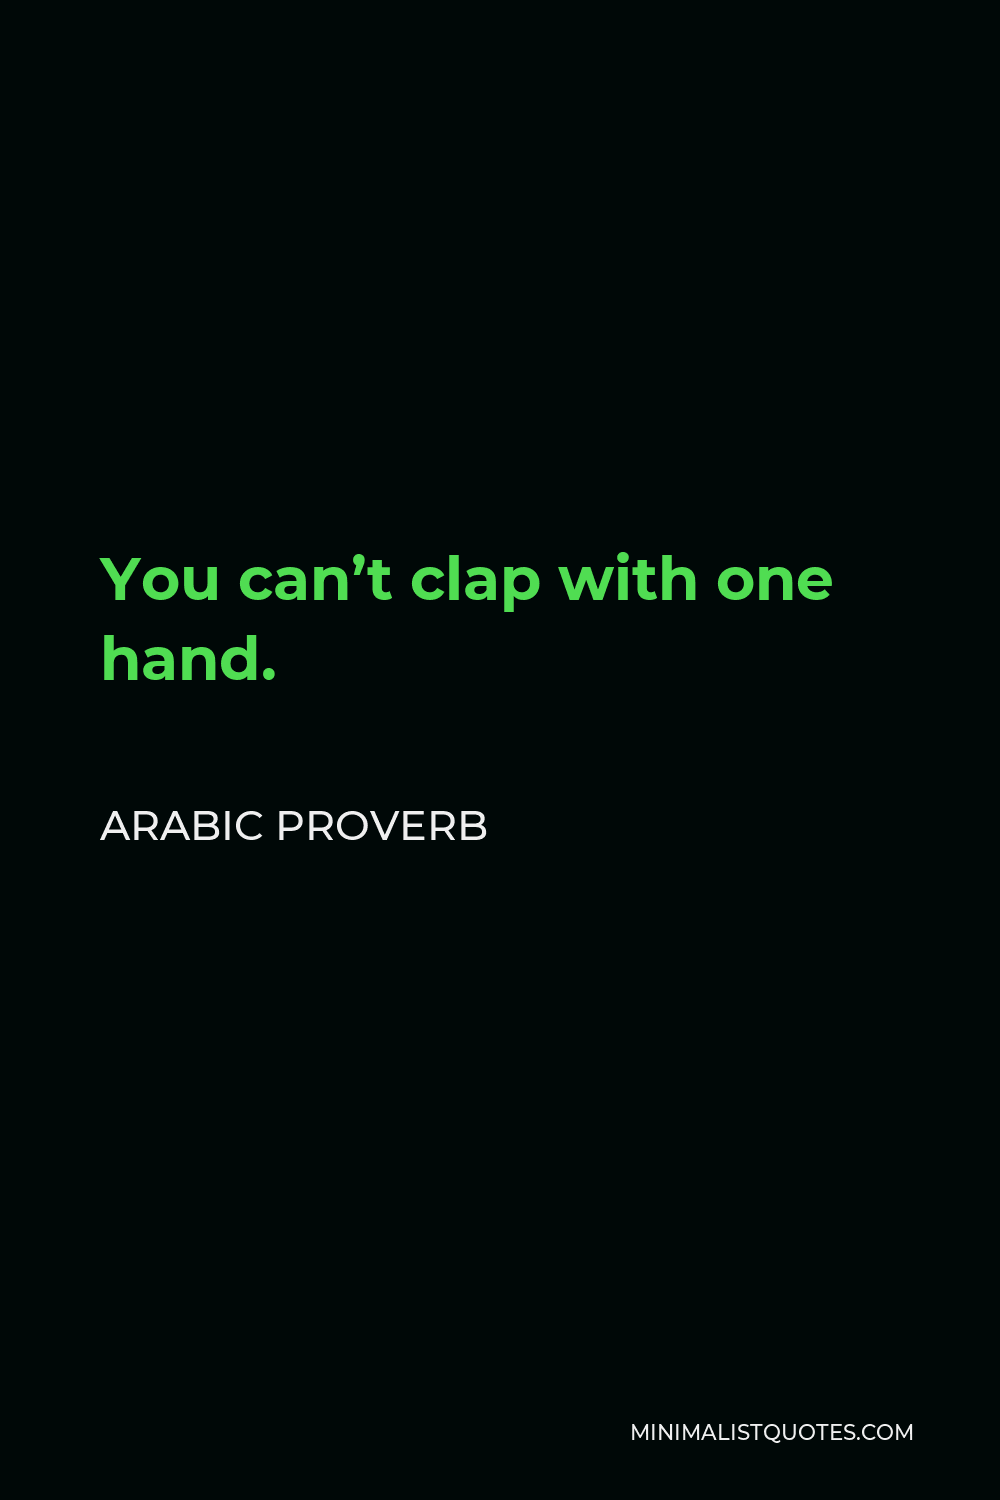 Arabic Proverb Quote - You can’t clap with one hand.